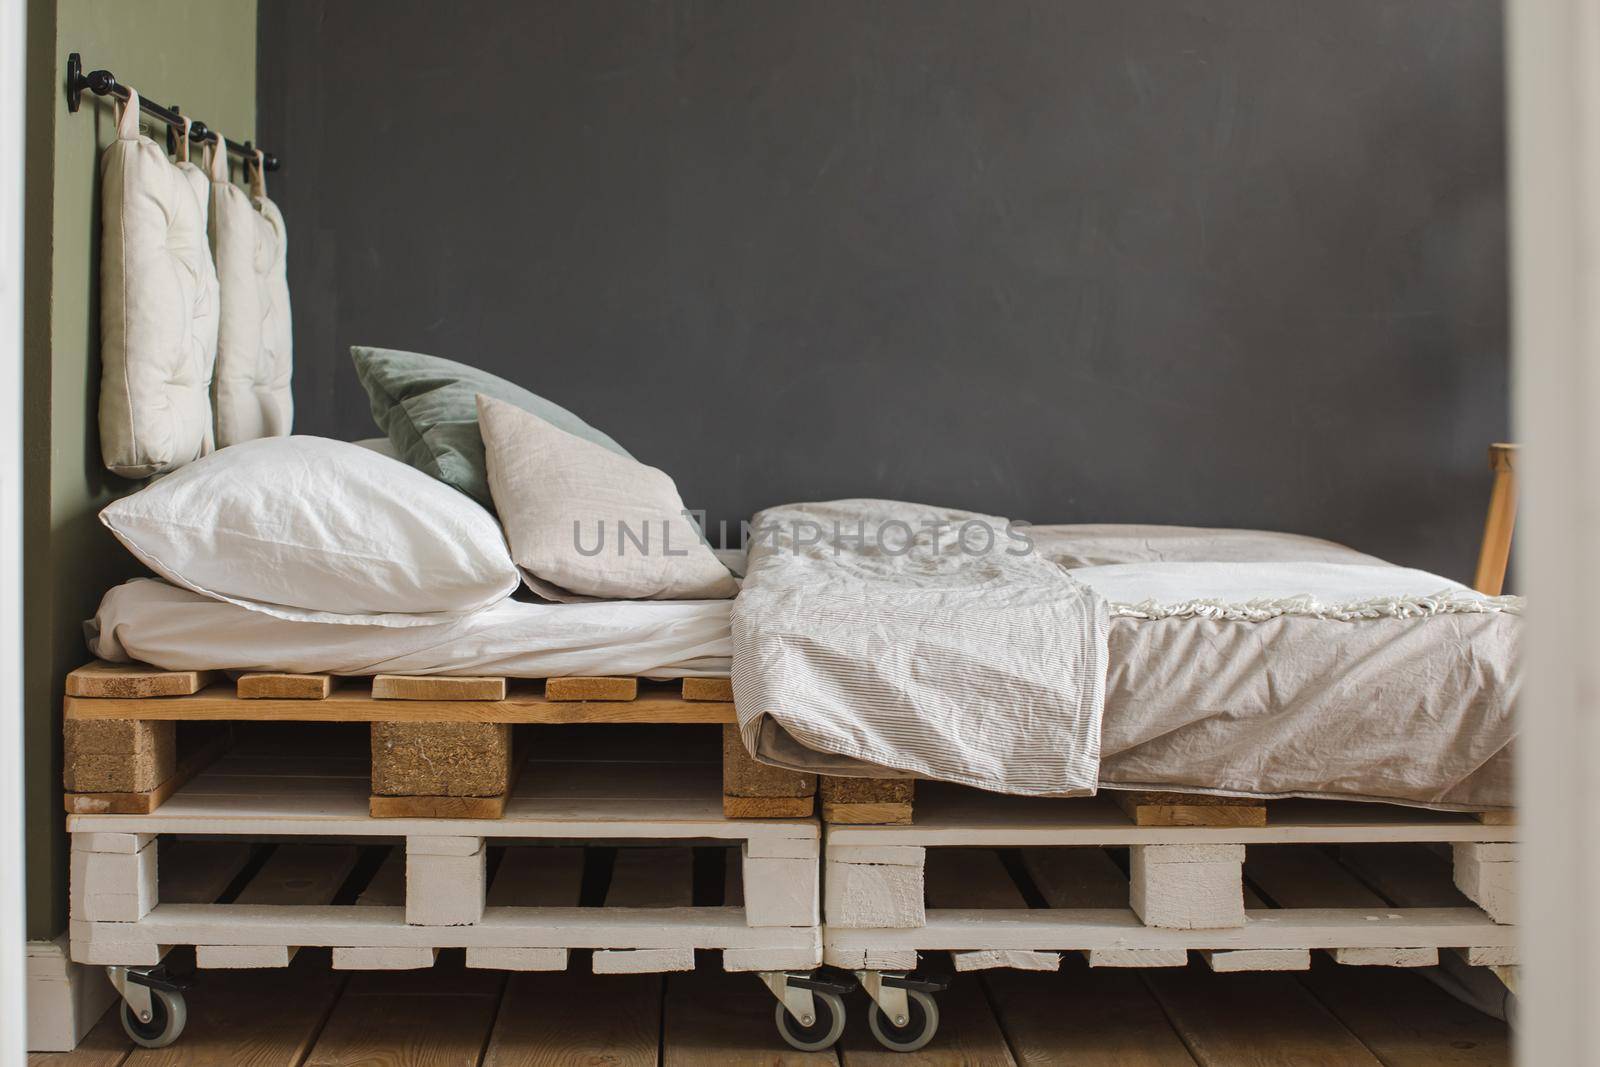 Industrial style bedroom with recycled pallet bed frame designs